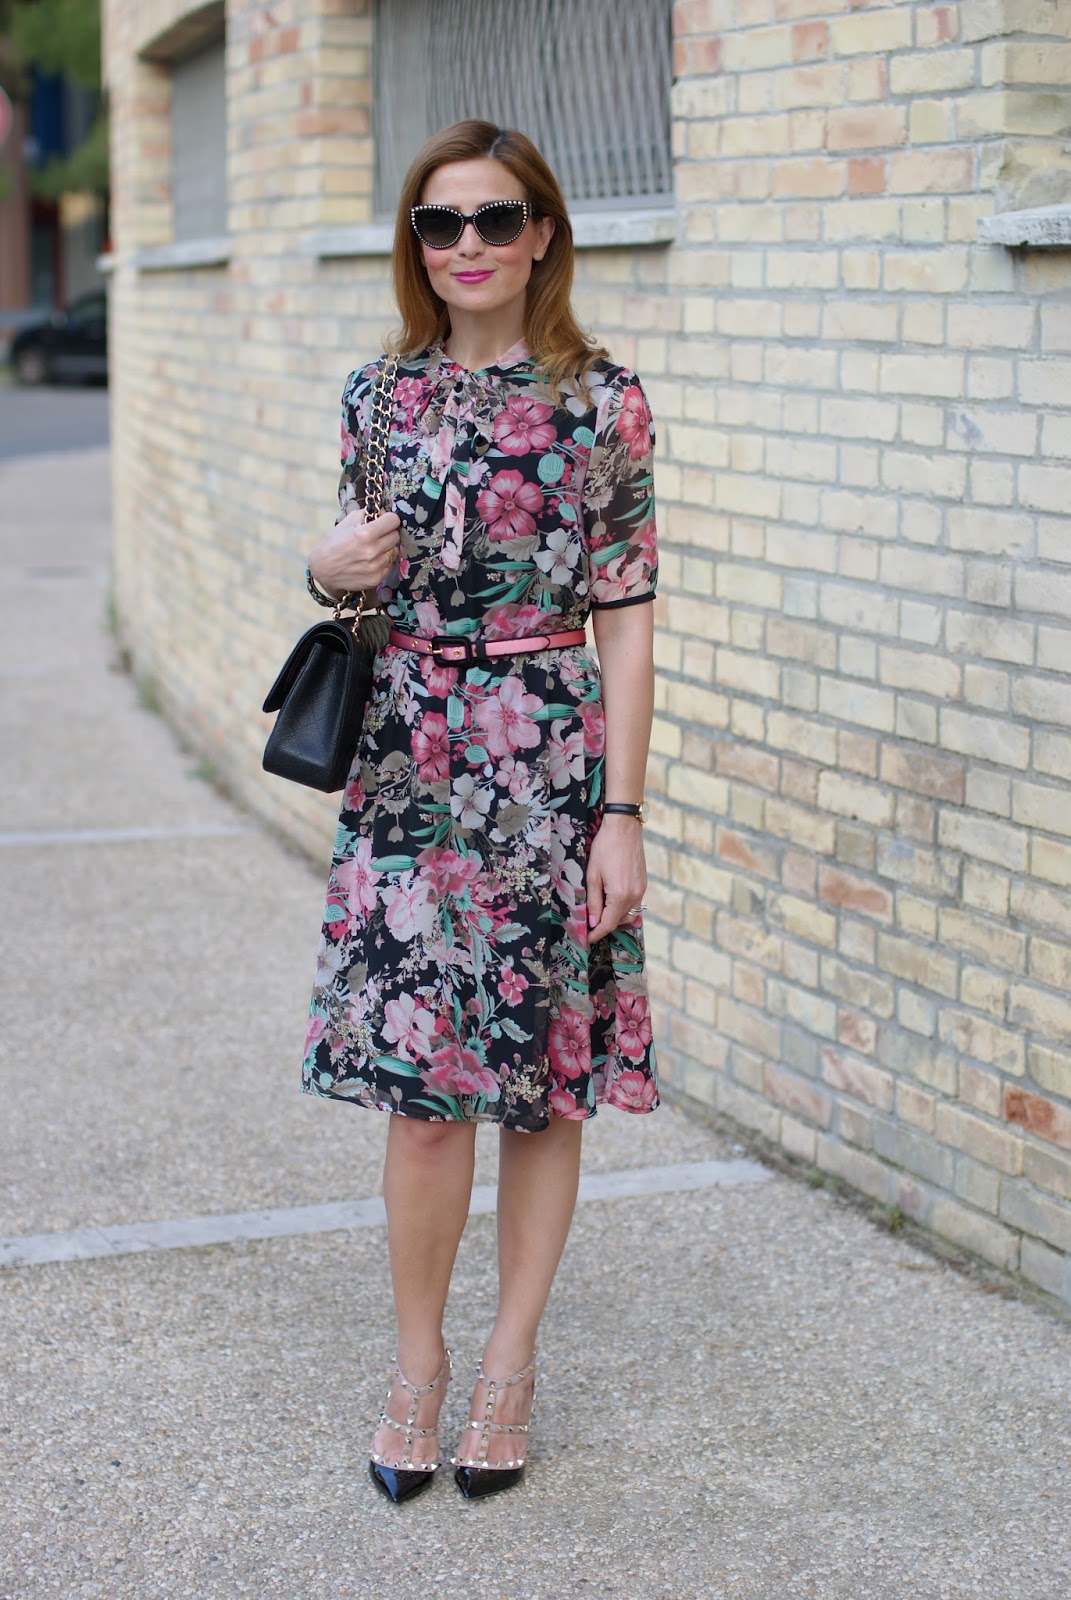 Floral chiffon dress with Valentino Rockstud heels and Chanel bag on Fashion and Cookies fashion blog, fashion blogger style